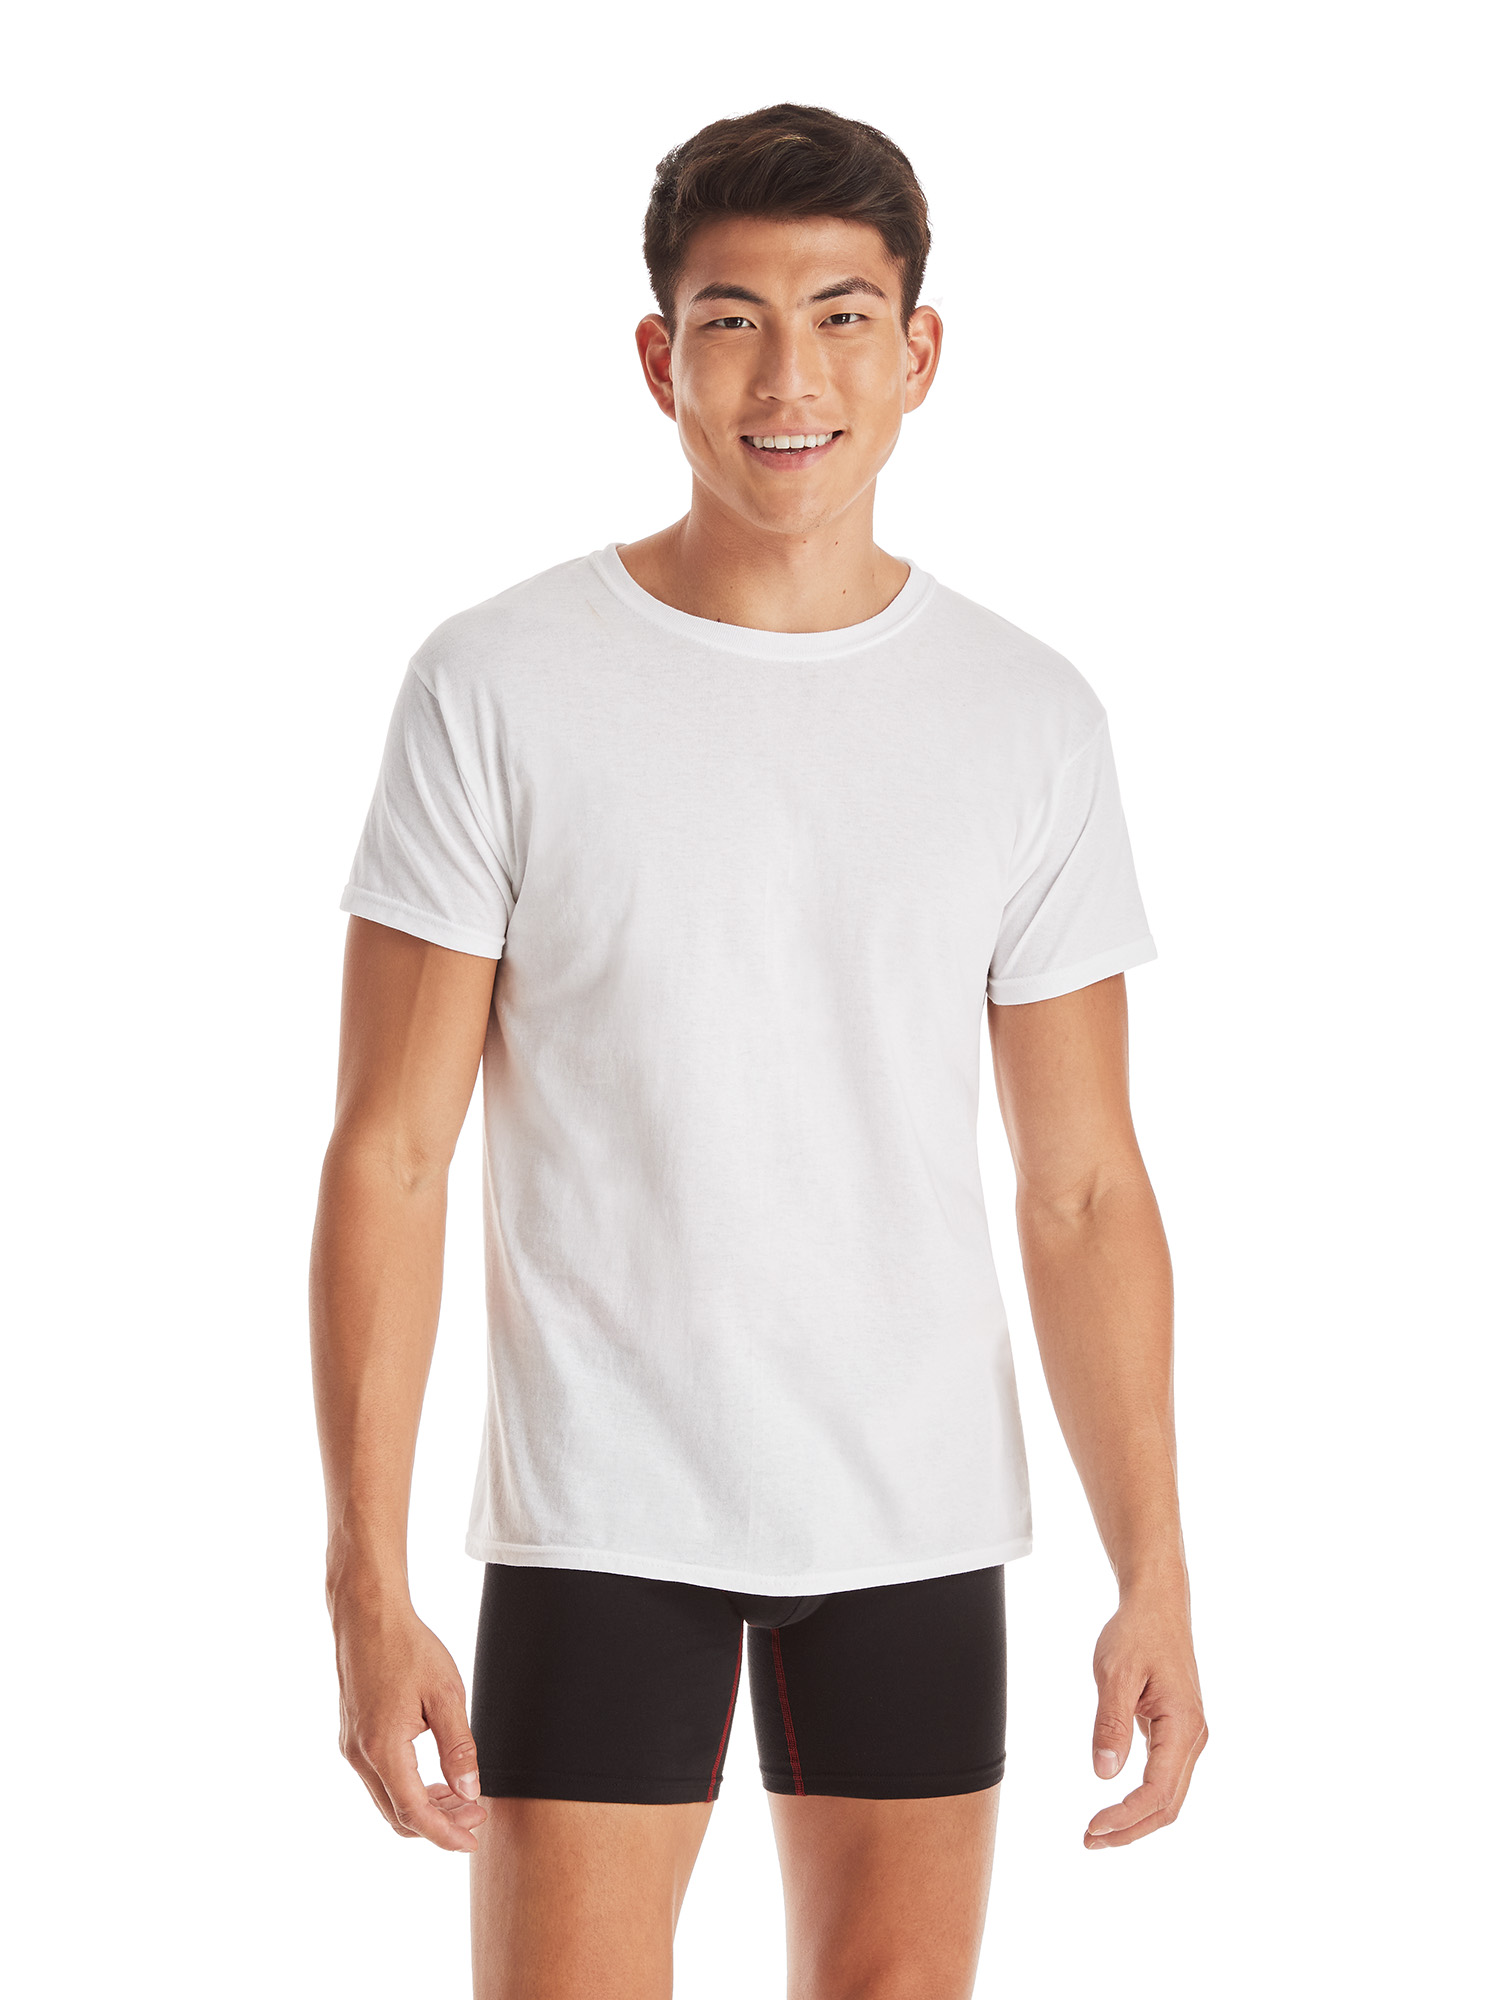 Hanes Men's Value Pack White Crew T-Shirt Undershirts, 6 Pack - image 4 of 10